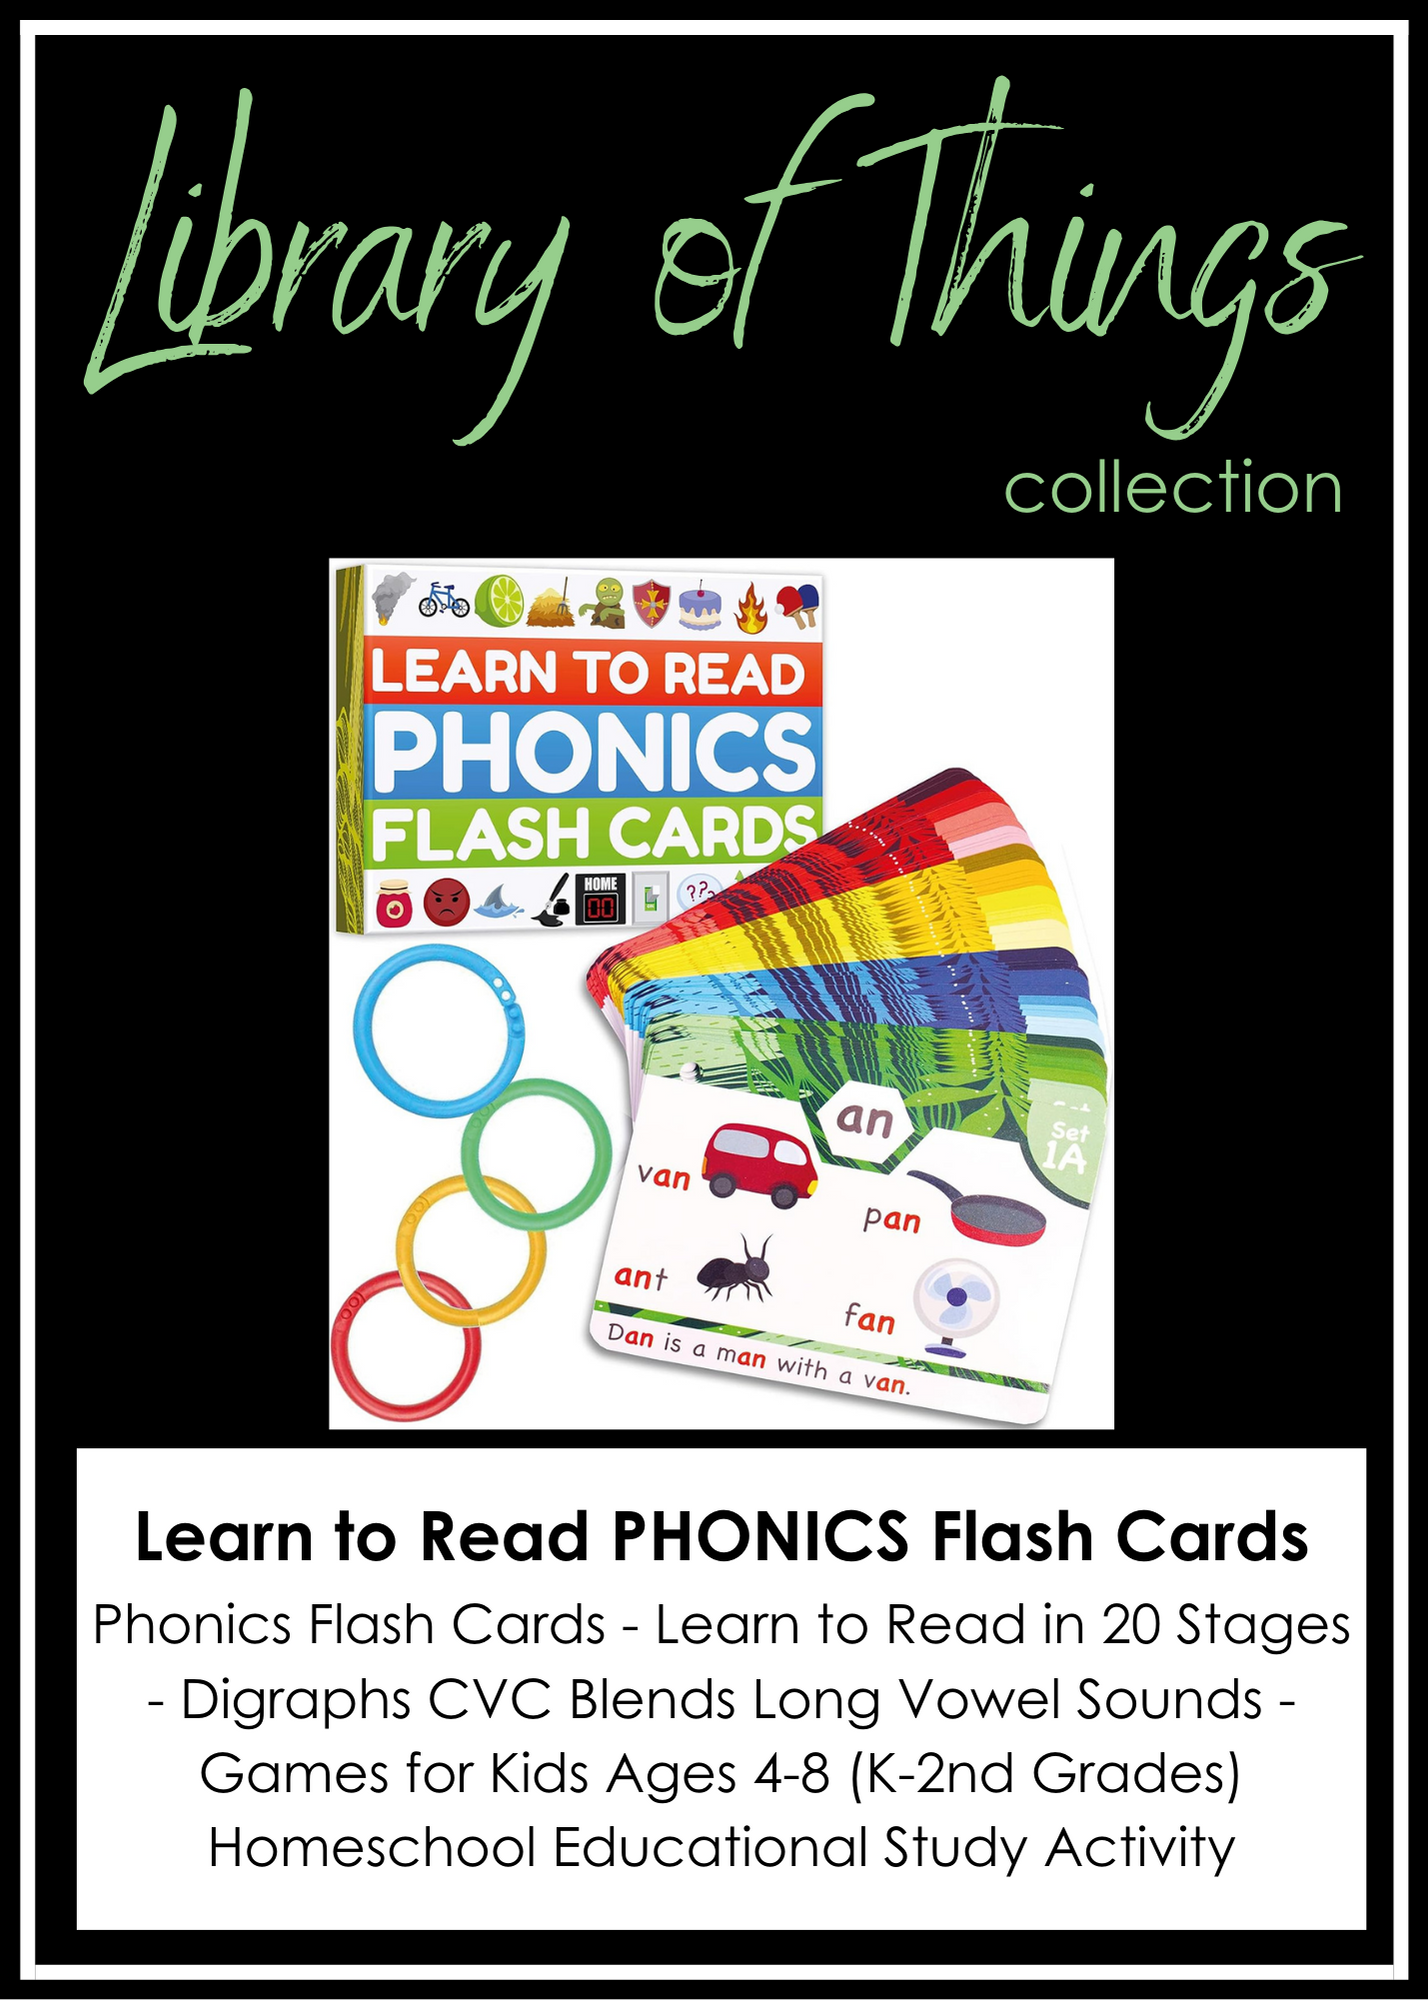 Library of Things: Learn to Read PHONICS Flash Cards